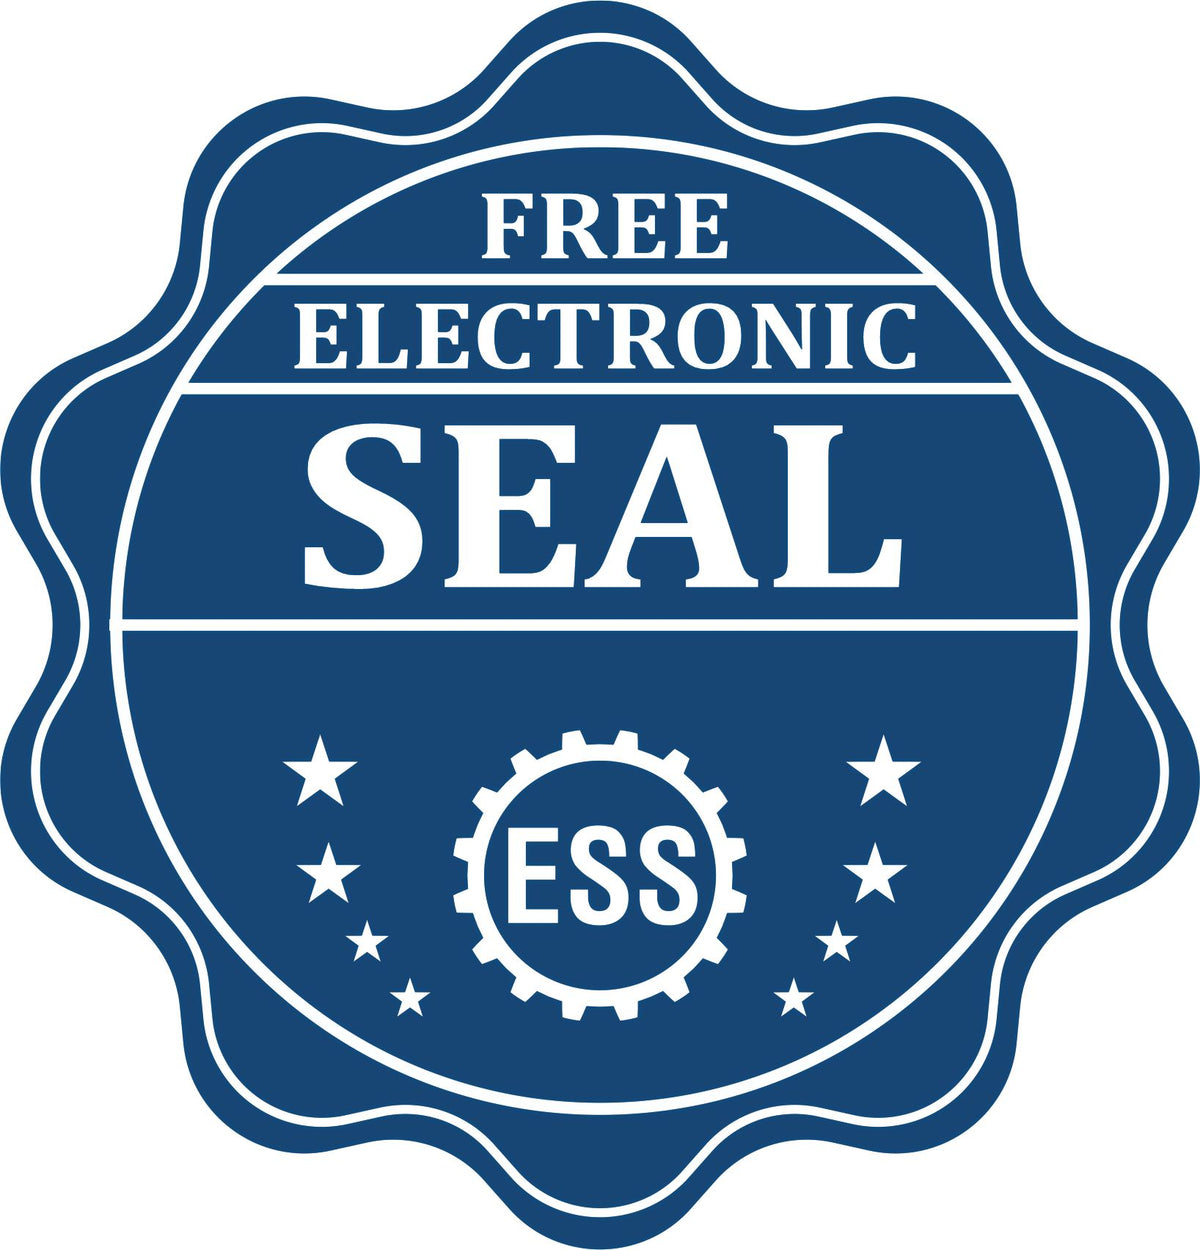 A badge showing a free electronic seal for the Hybrid Rhode Island Landscape Architect Seal with stars and the ESS gear on the emblem.